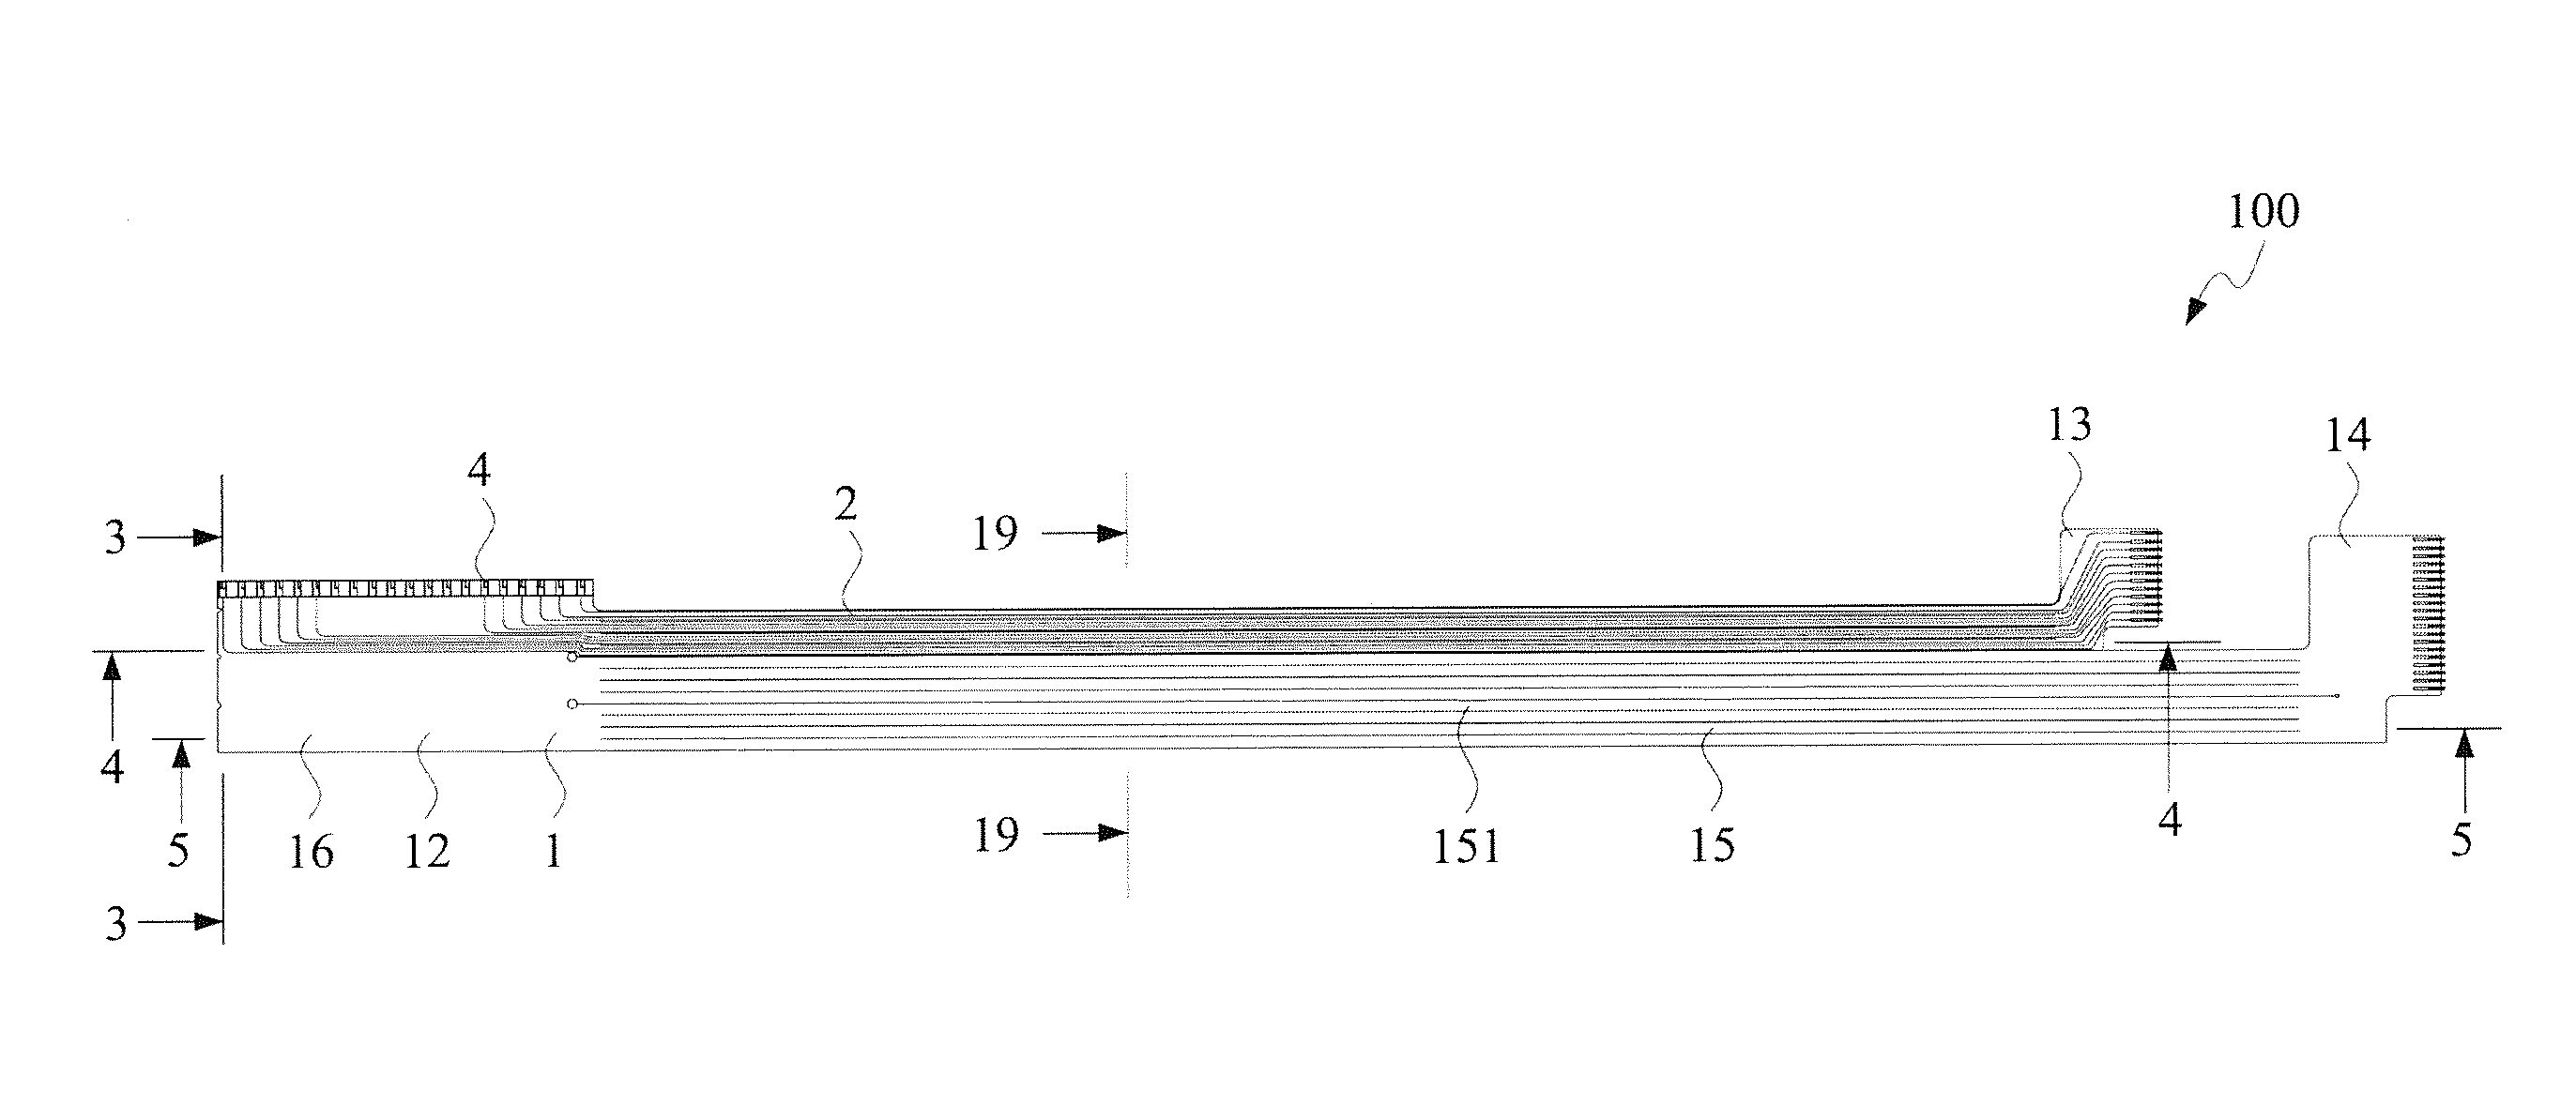 Double-side-conducting flexible-circuit flat cable with cluster section